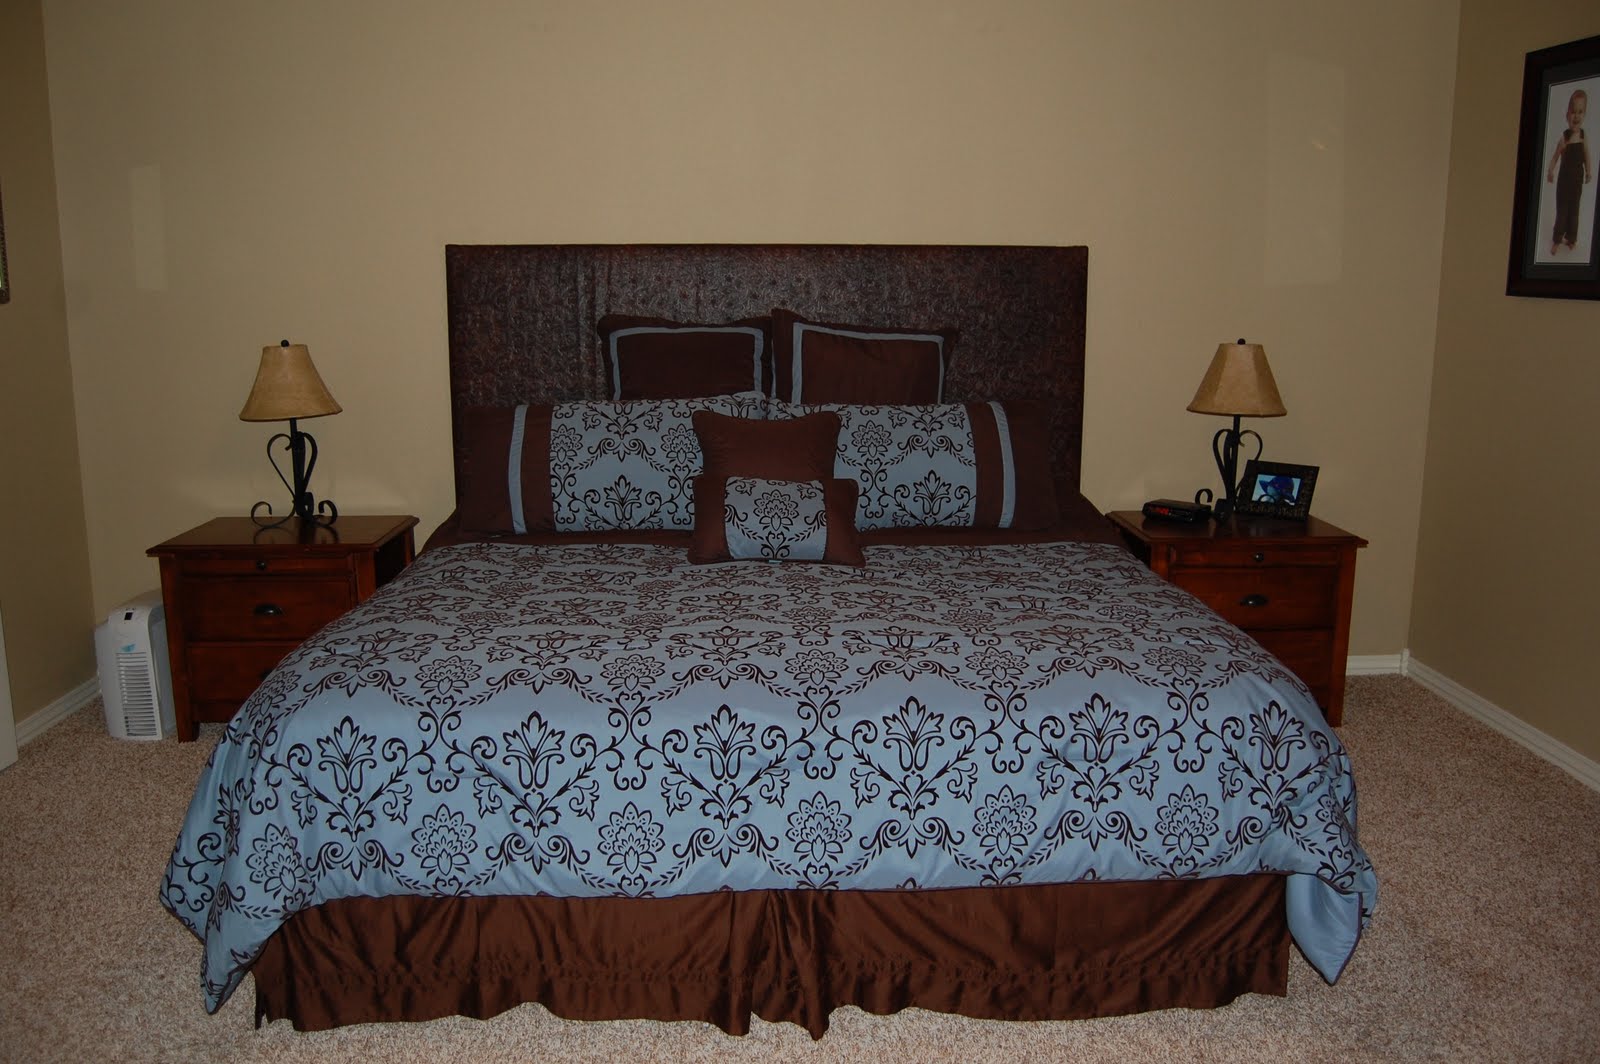 1600x1064px 7 Awesome Homemade Headboards Ideas Picture in Bedroom